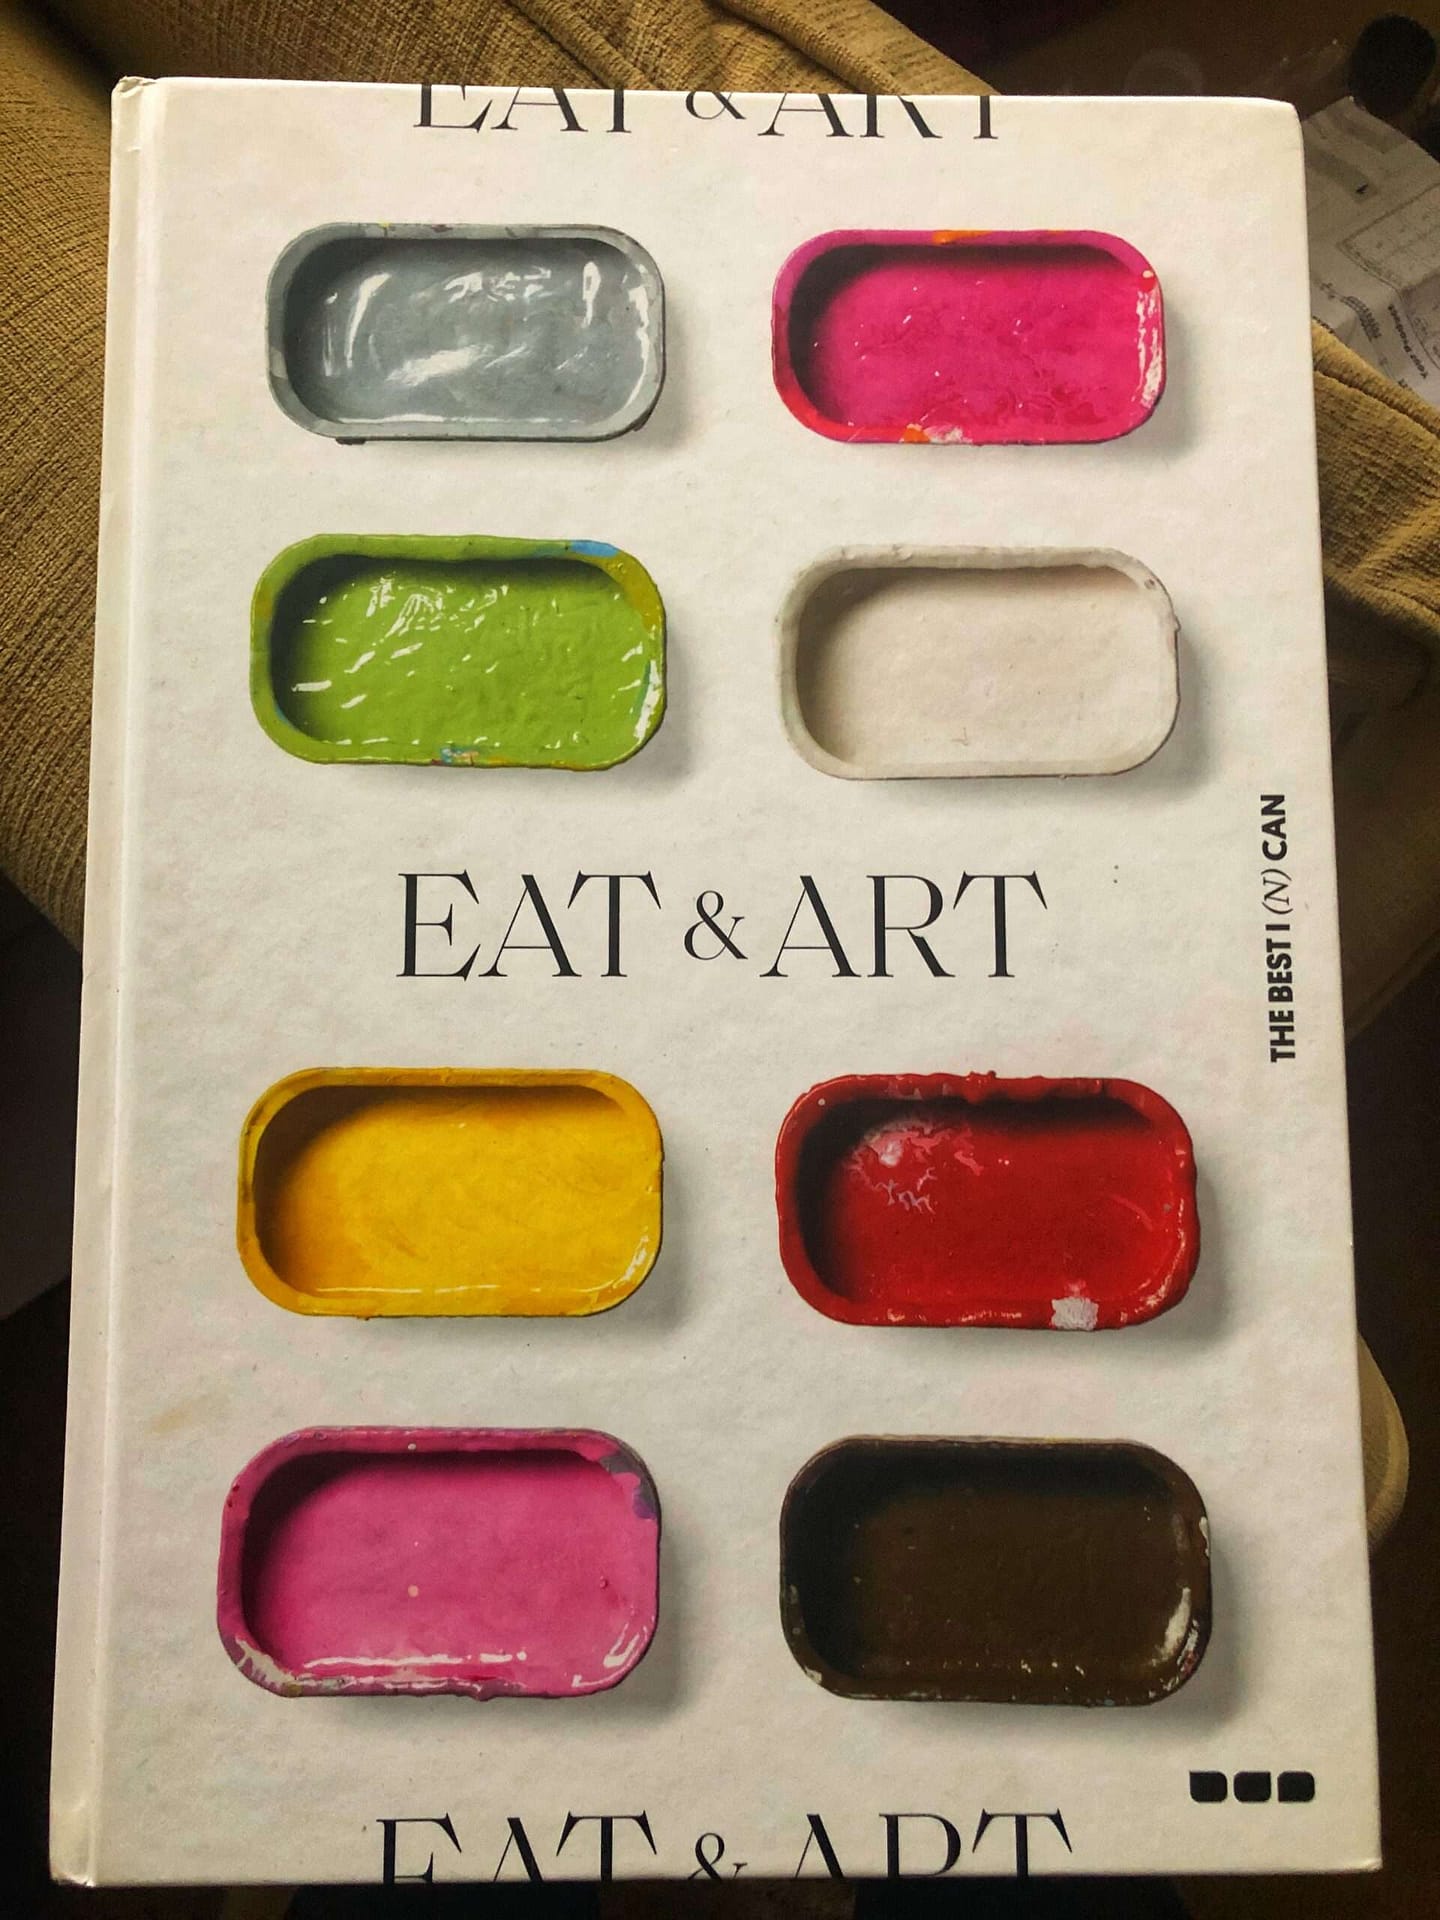 Can The Can "Eat & Art" book